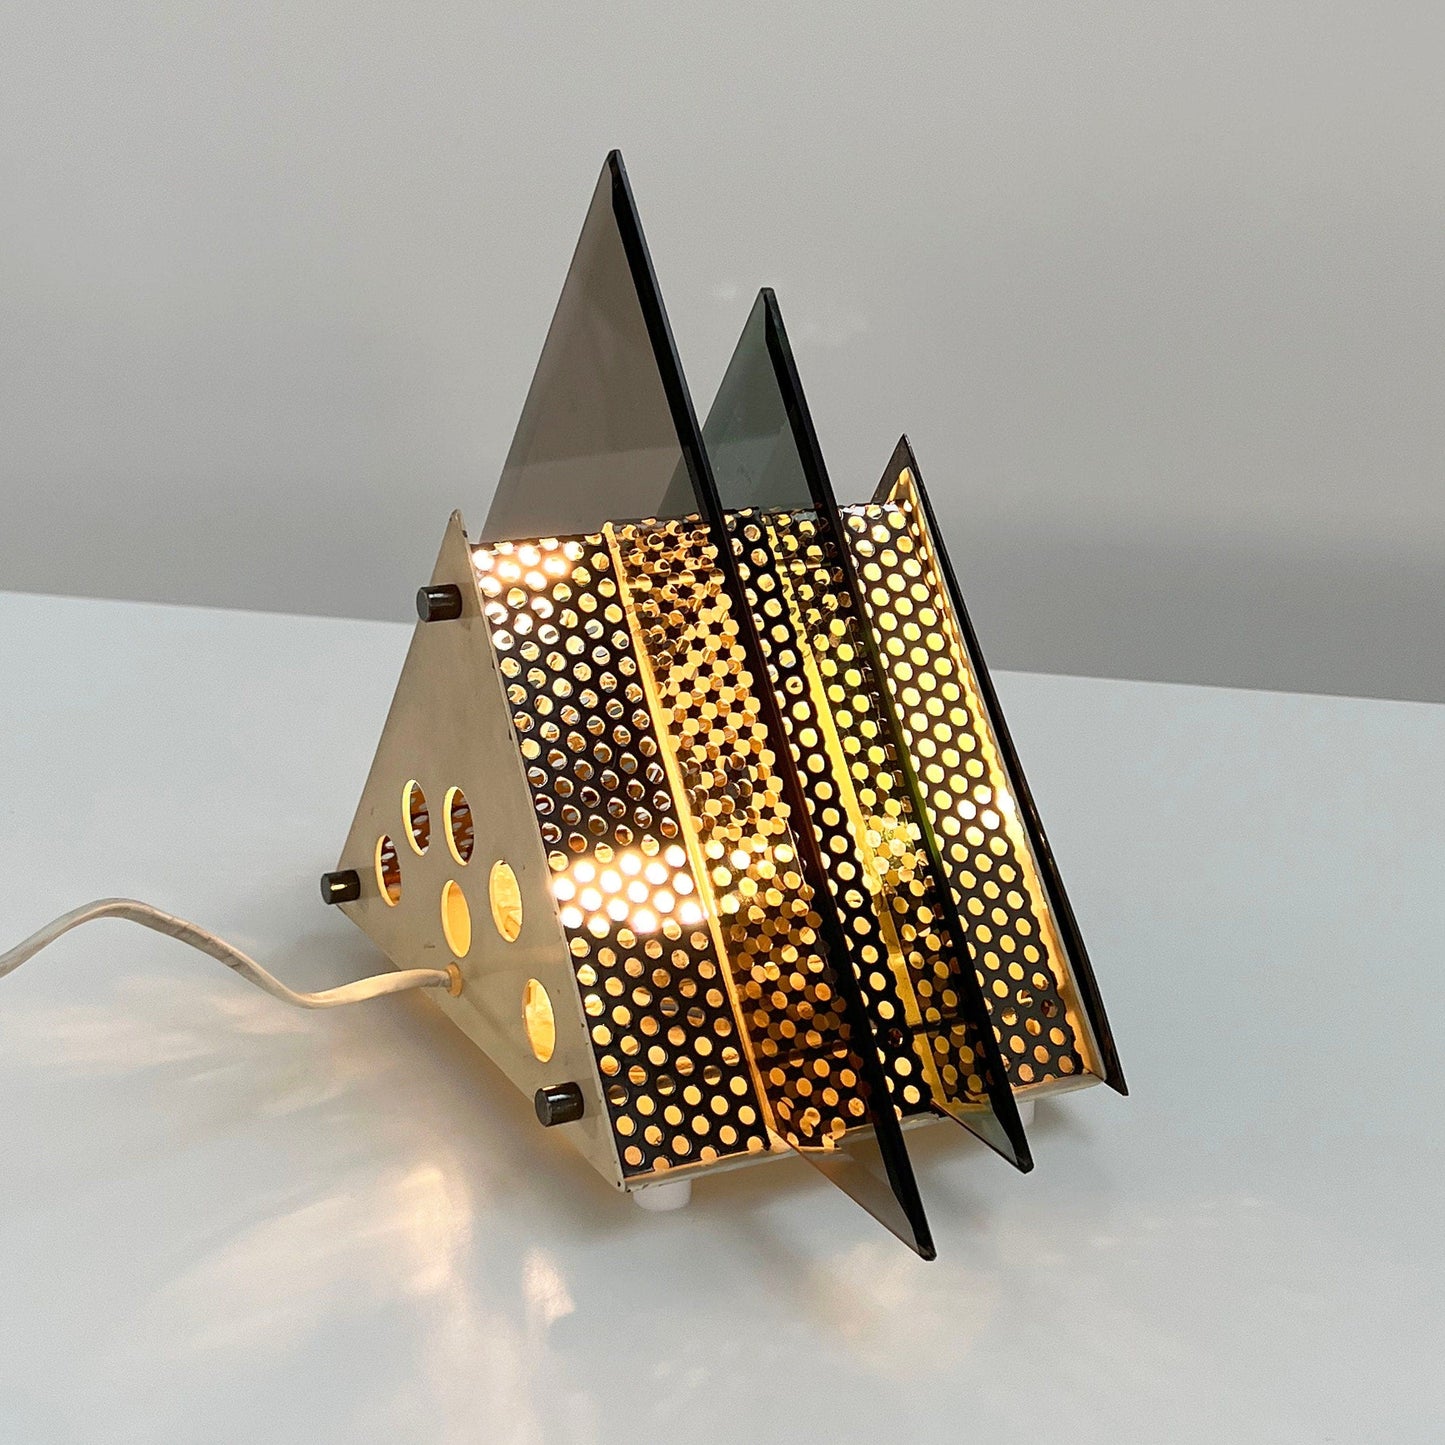 Chromed and Glass Triangle Table Lamp, 1980s Vintage